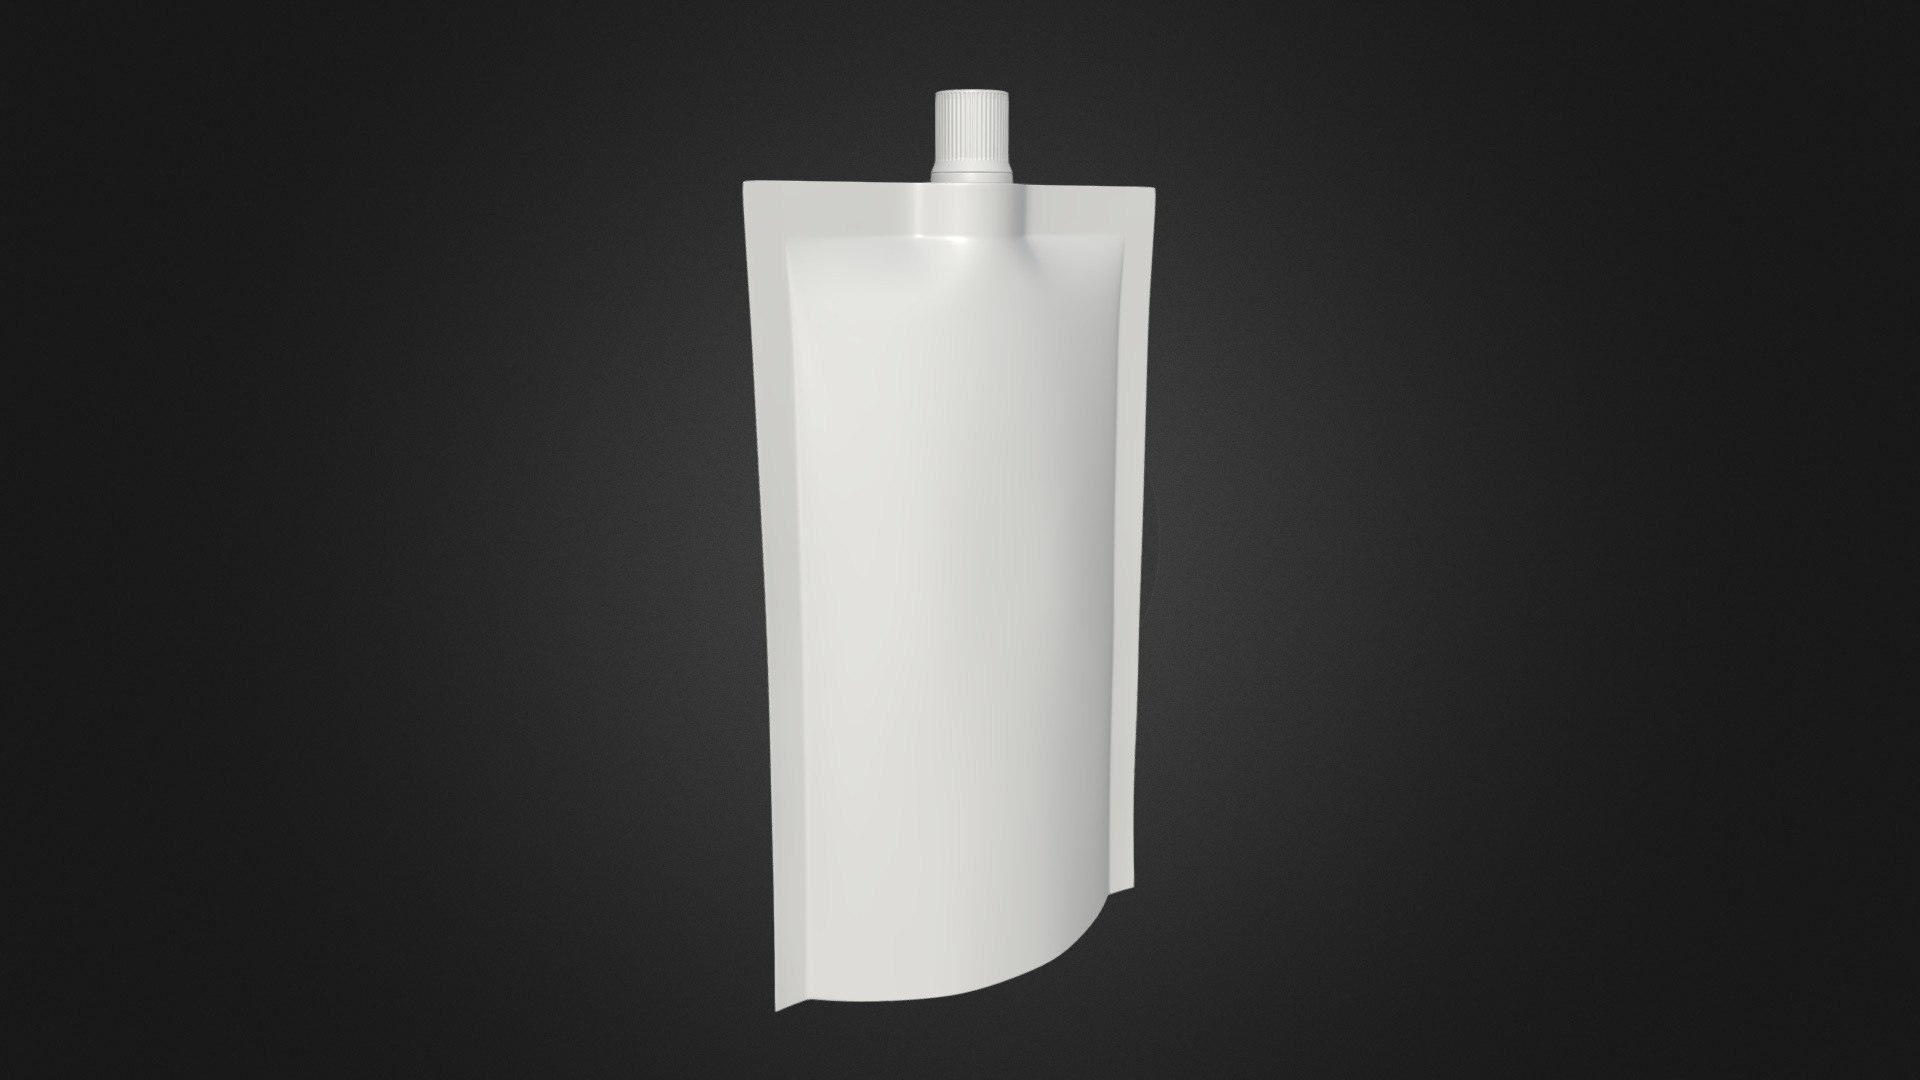 3D model pouch bag - This is a 3D model of the pouch bag. The 3D model is about a white bottle with a black background.